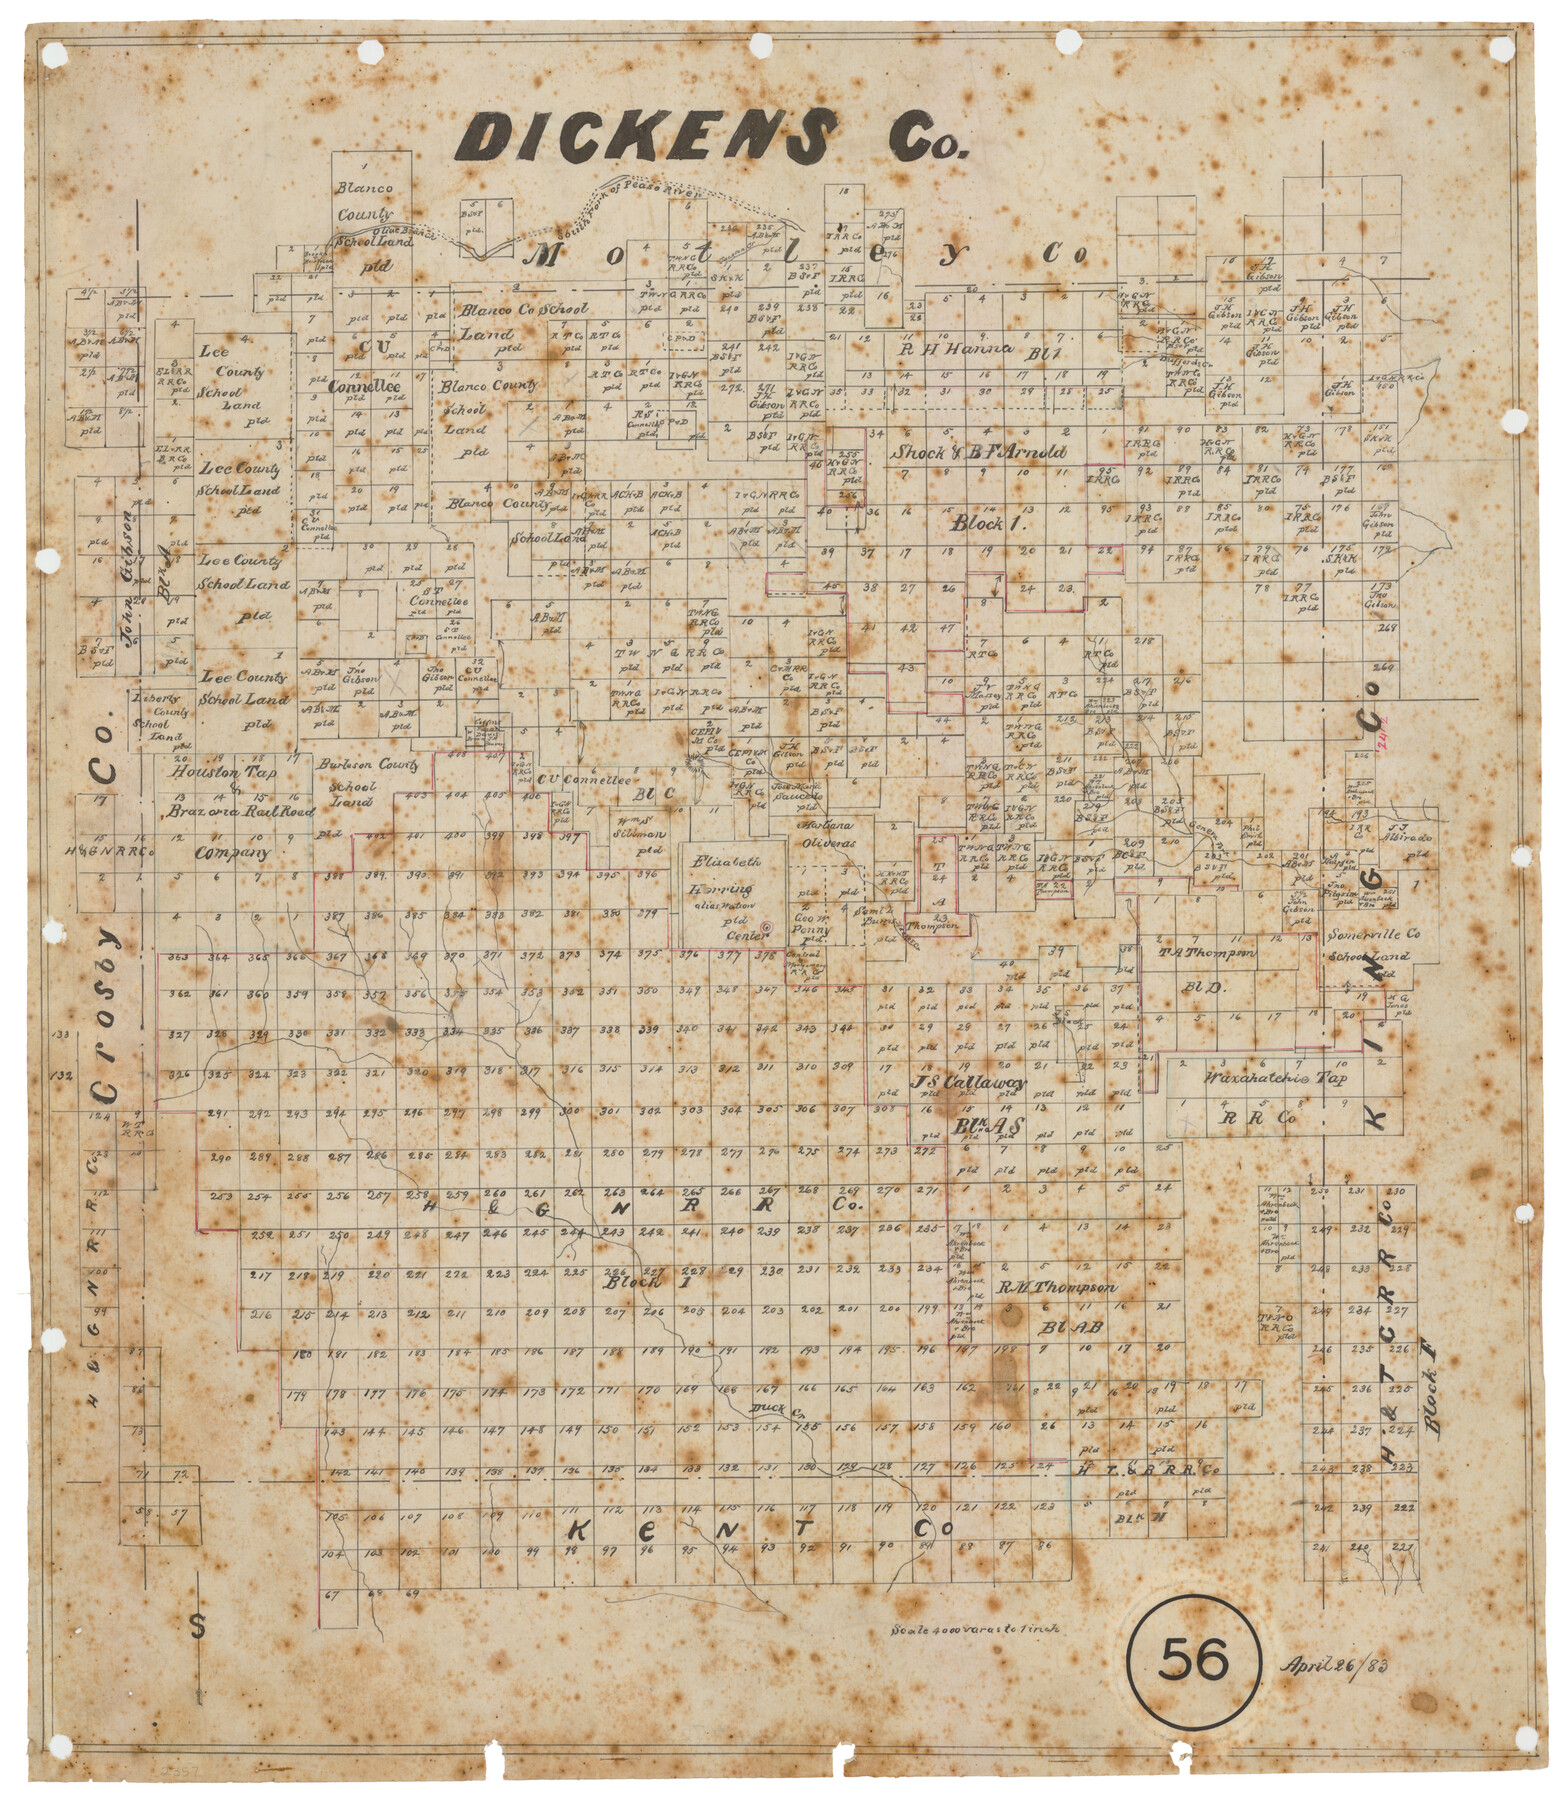 722, Dickens County, Texas, Maddox Collection